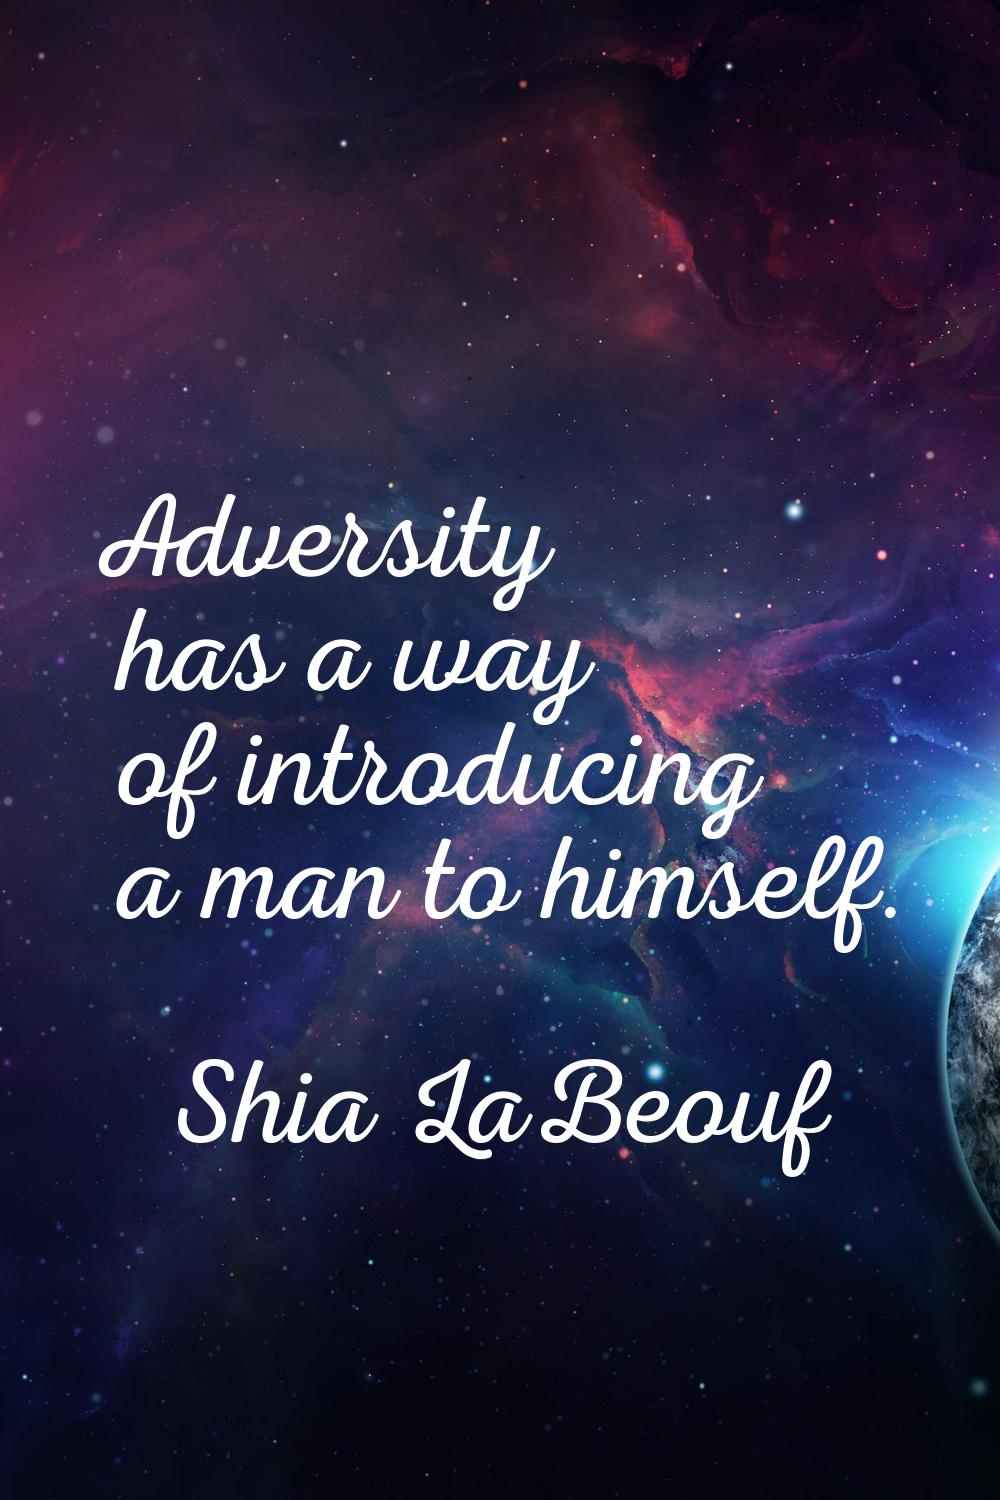 Adversity has a way of introducing a man to himself.